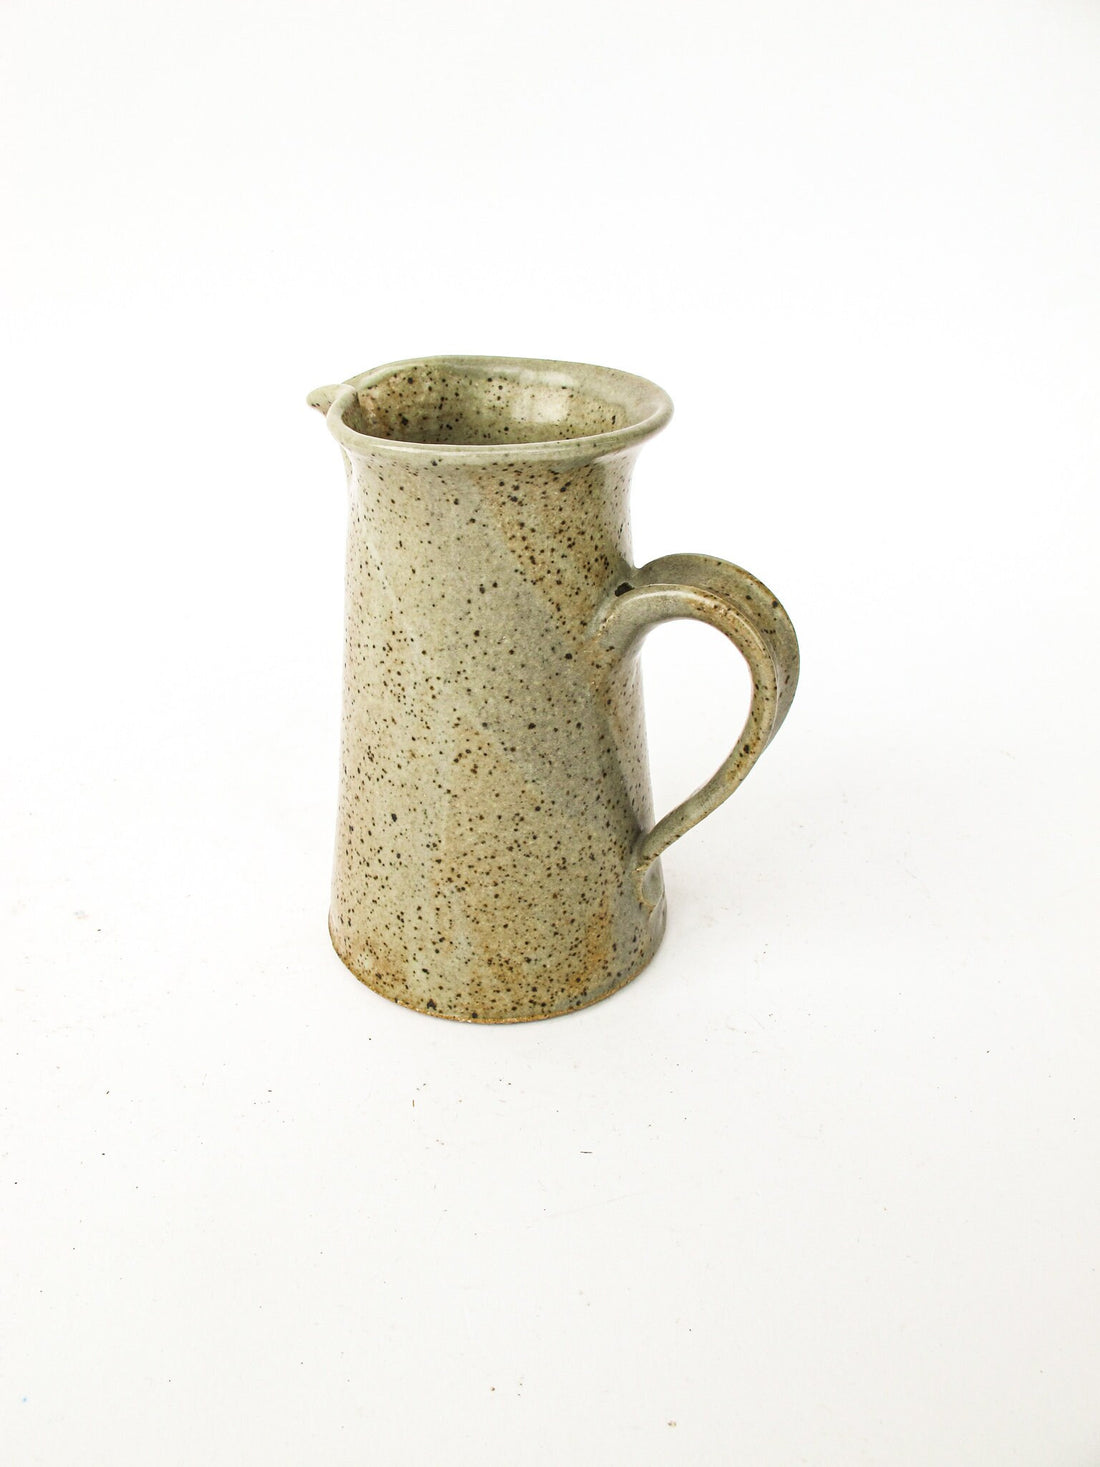 Greyish White Speckled Pottery Ceramic Pitcher with Rust Tones